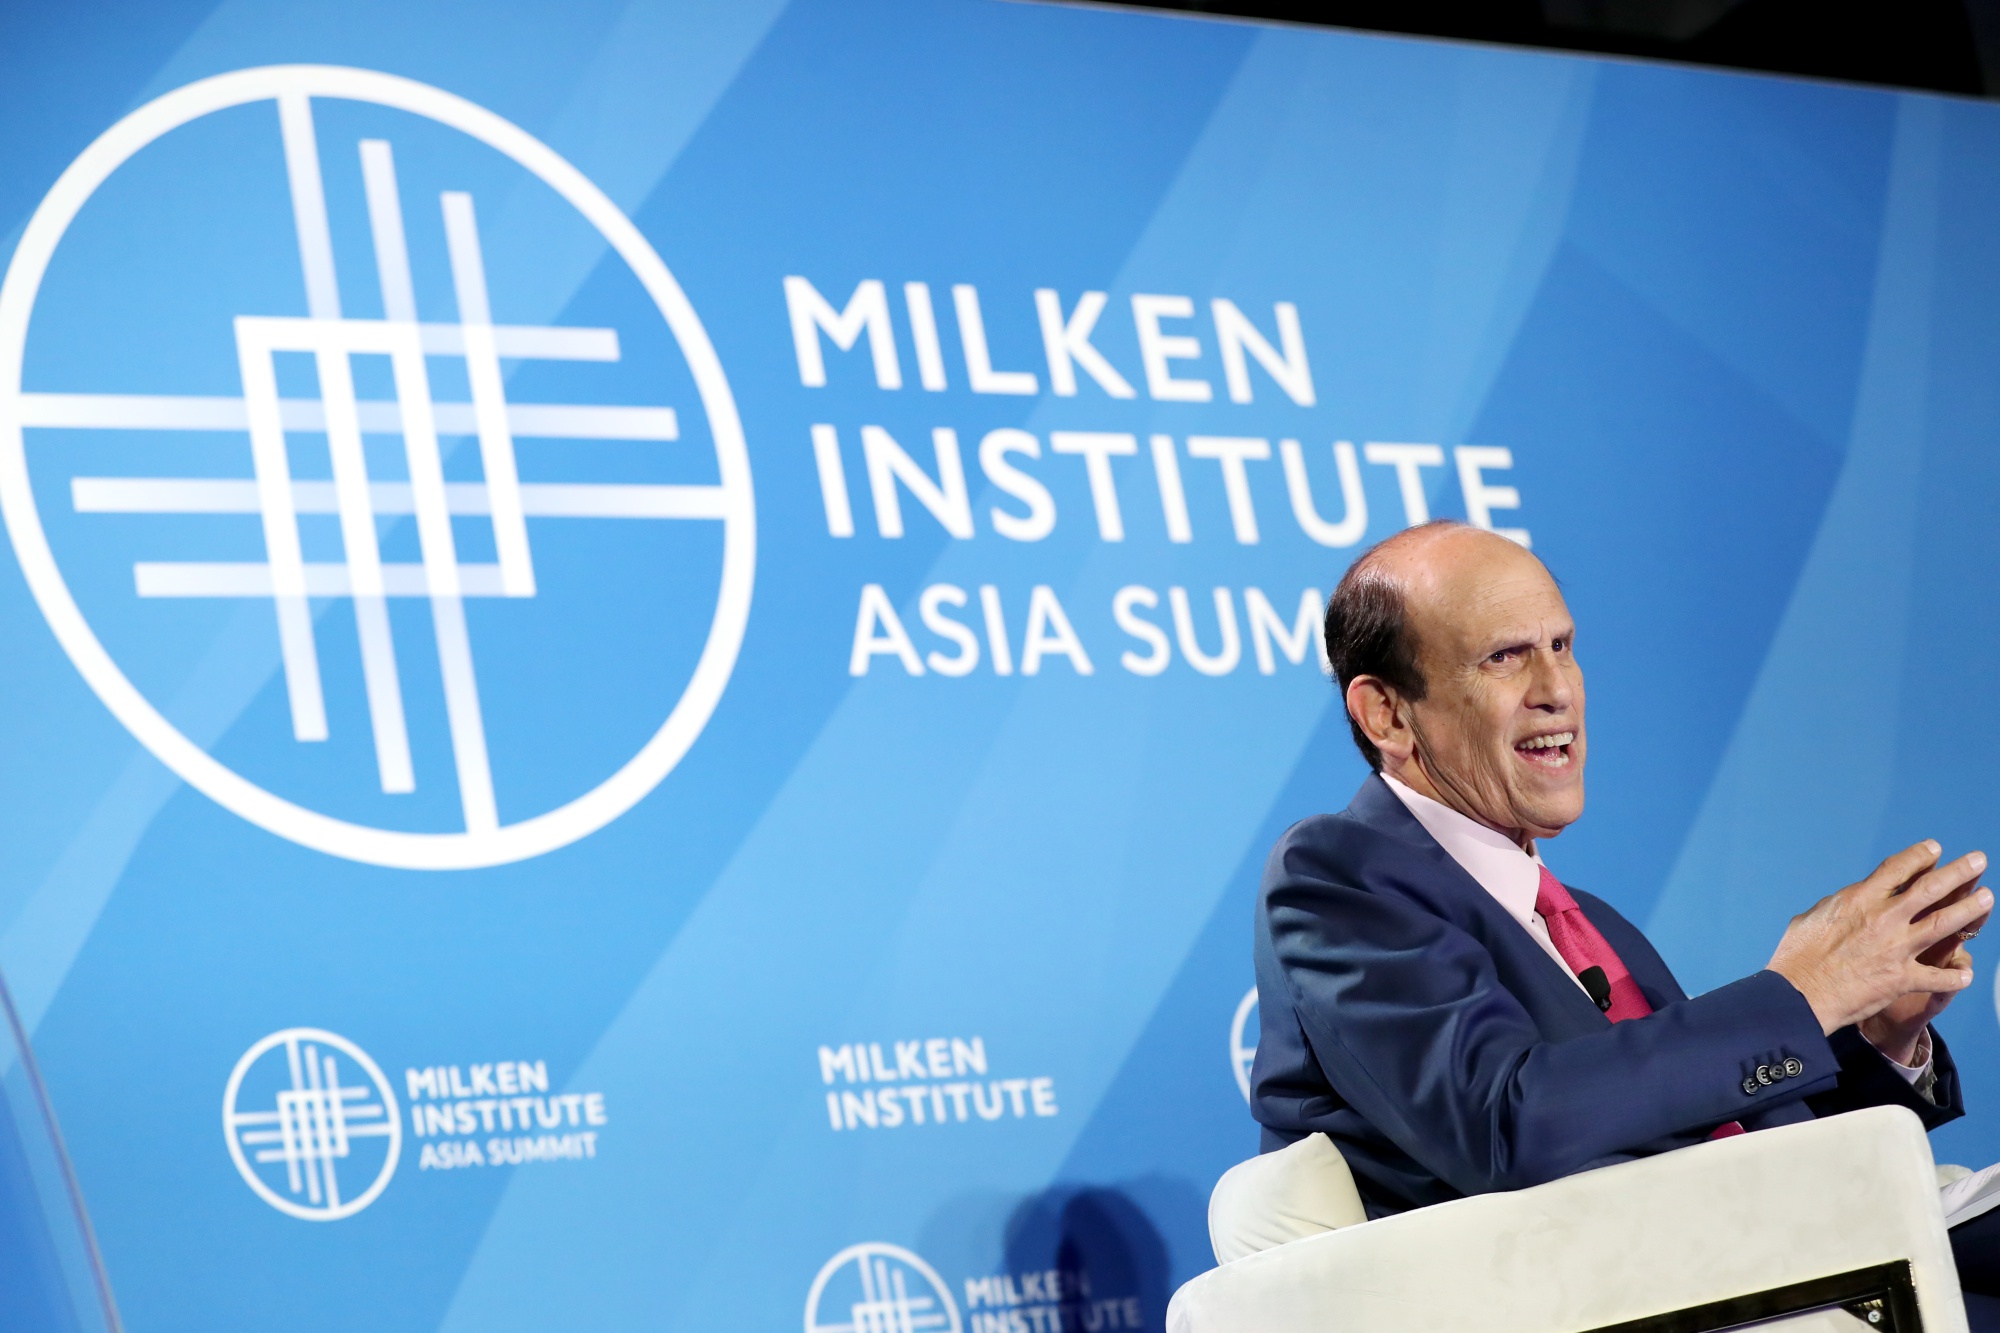 Wall Street Travels West to Milken Confab in Search of a Deal Revival